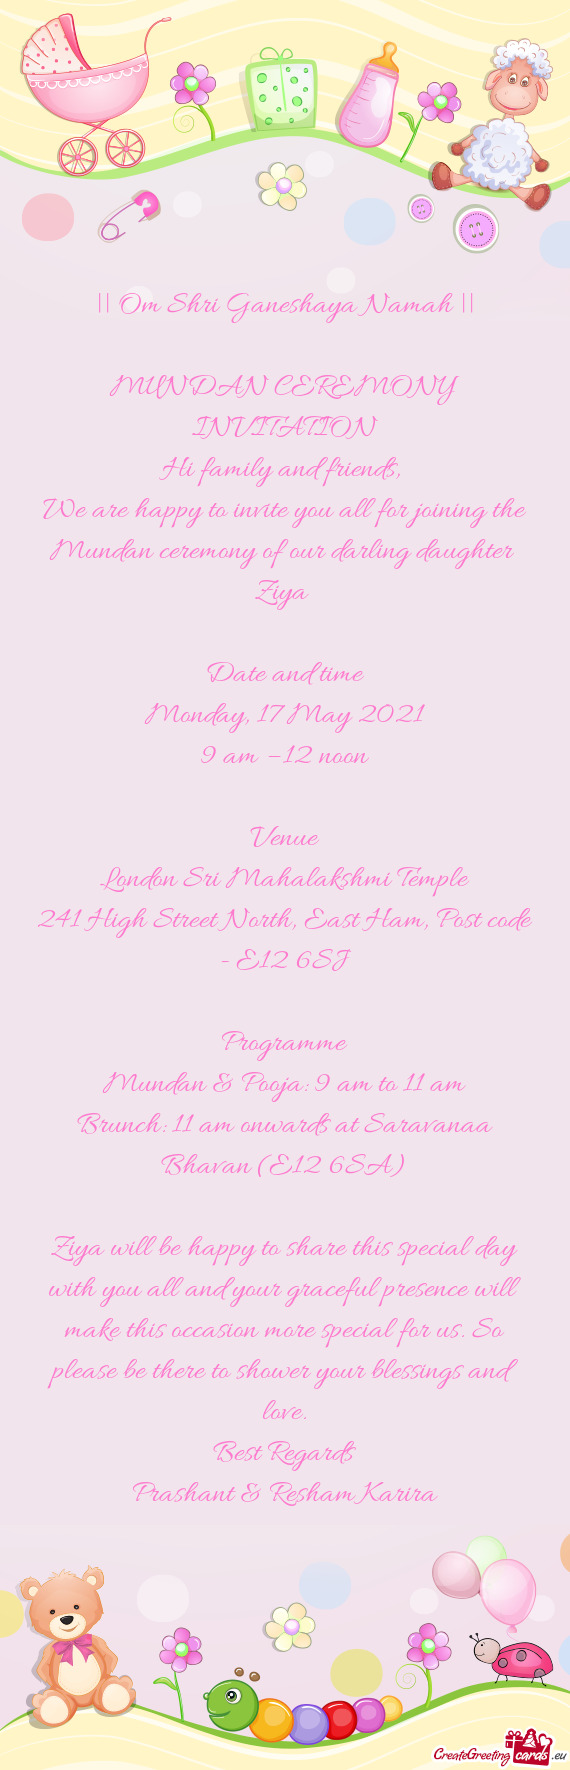 We are happy to invite you all for joining the Mundan ceremony of our darling daughter